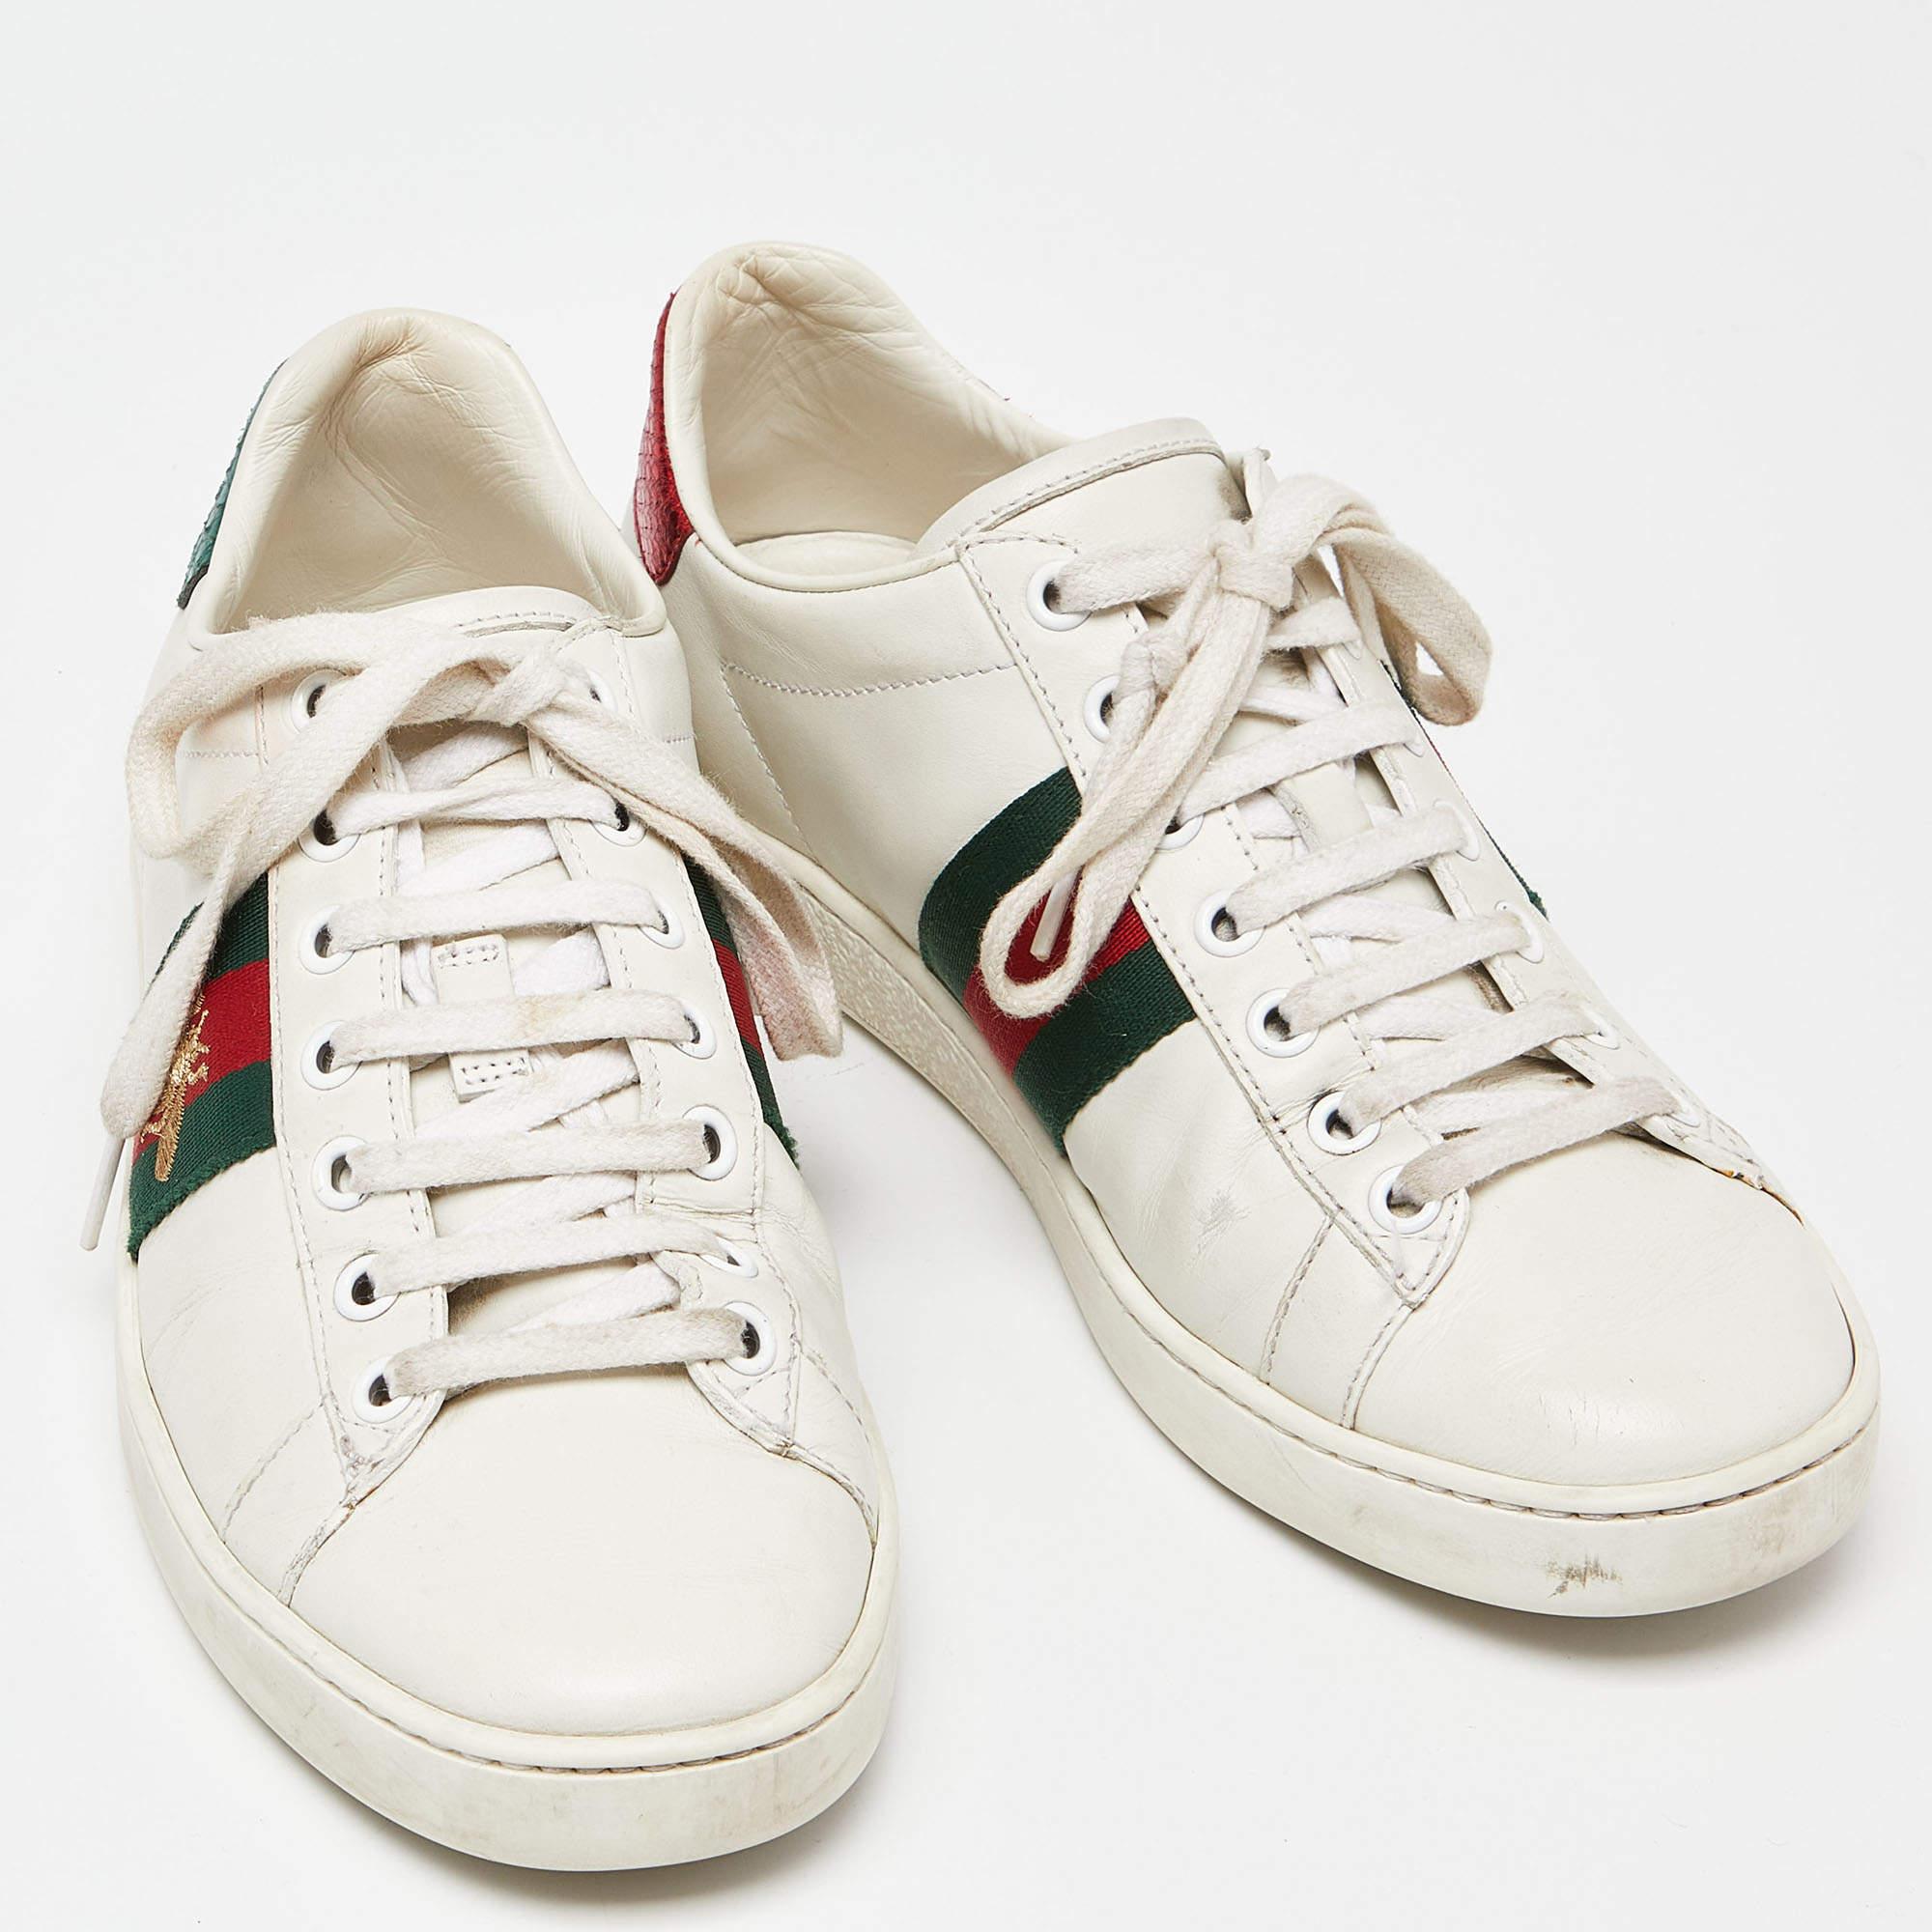 Gucci White Leather Web Detail Bee Embroidered Ace Low Top Sneakers Size 36.5 In Good Condition For Sale In Dubai, Al Qouz 2